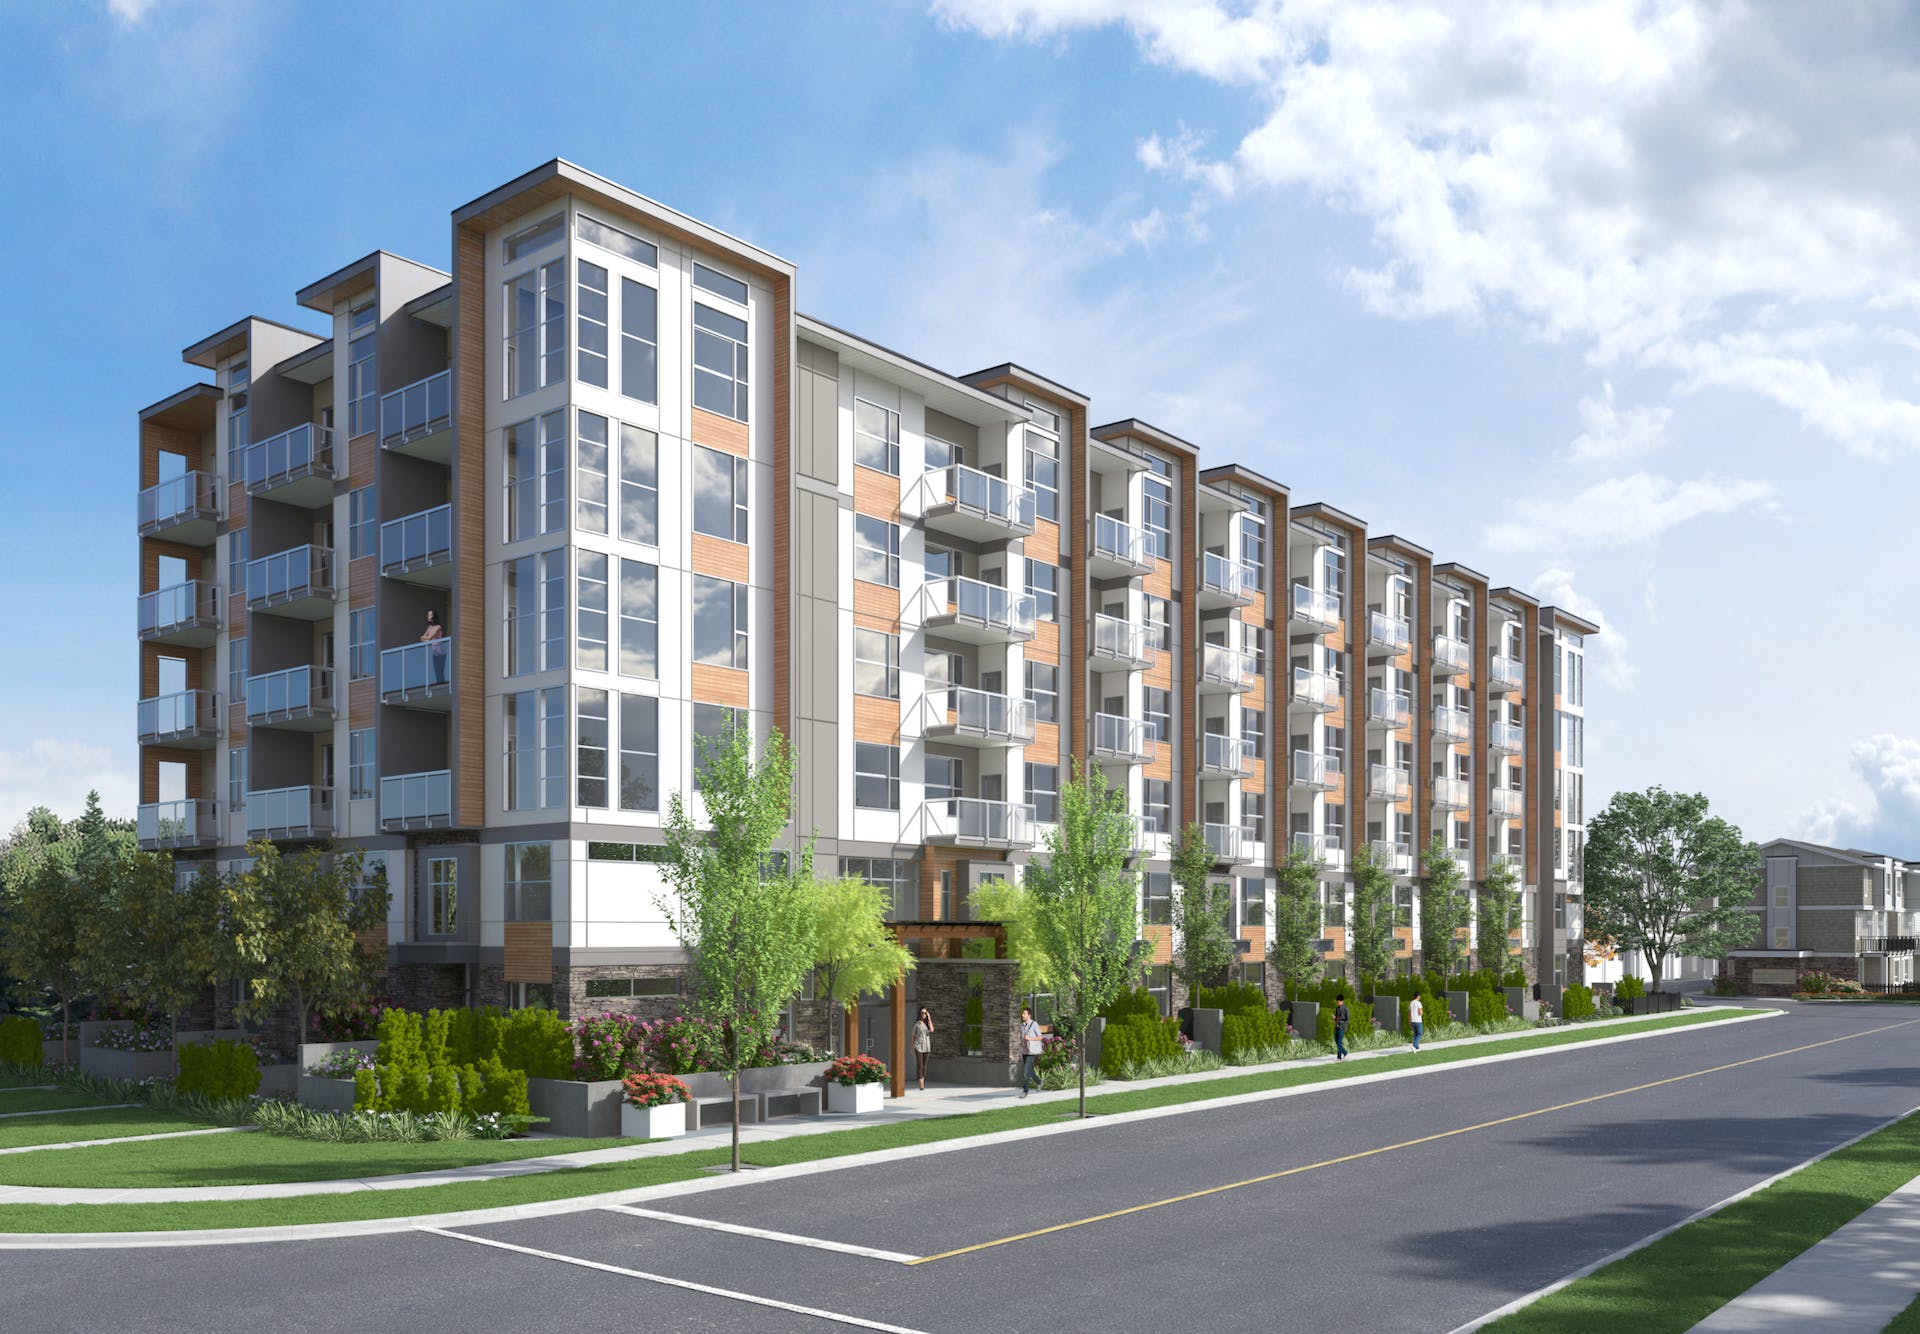 A collection of 67 condominiums and 45 townhomes coming soon to Newton.